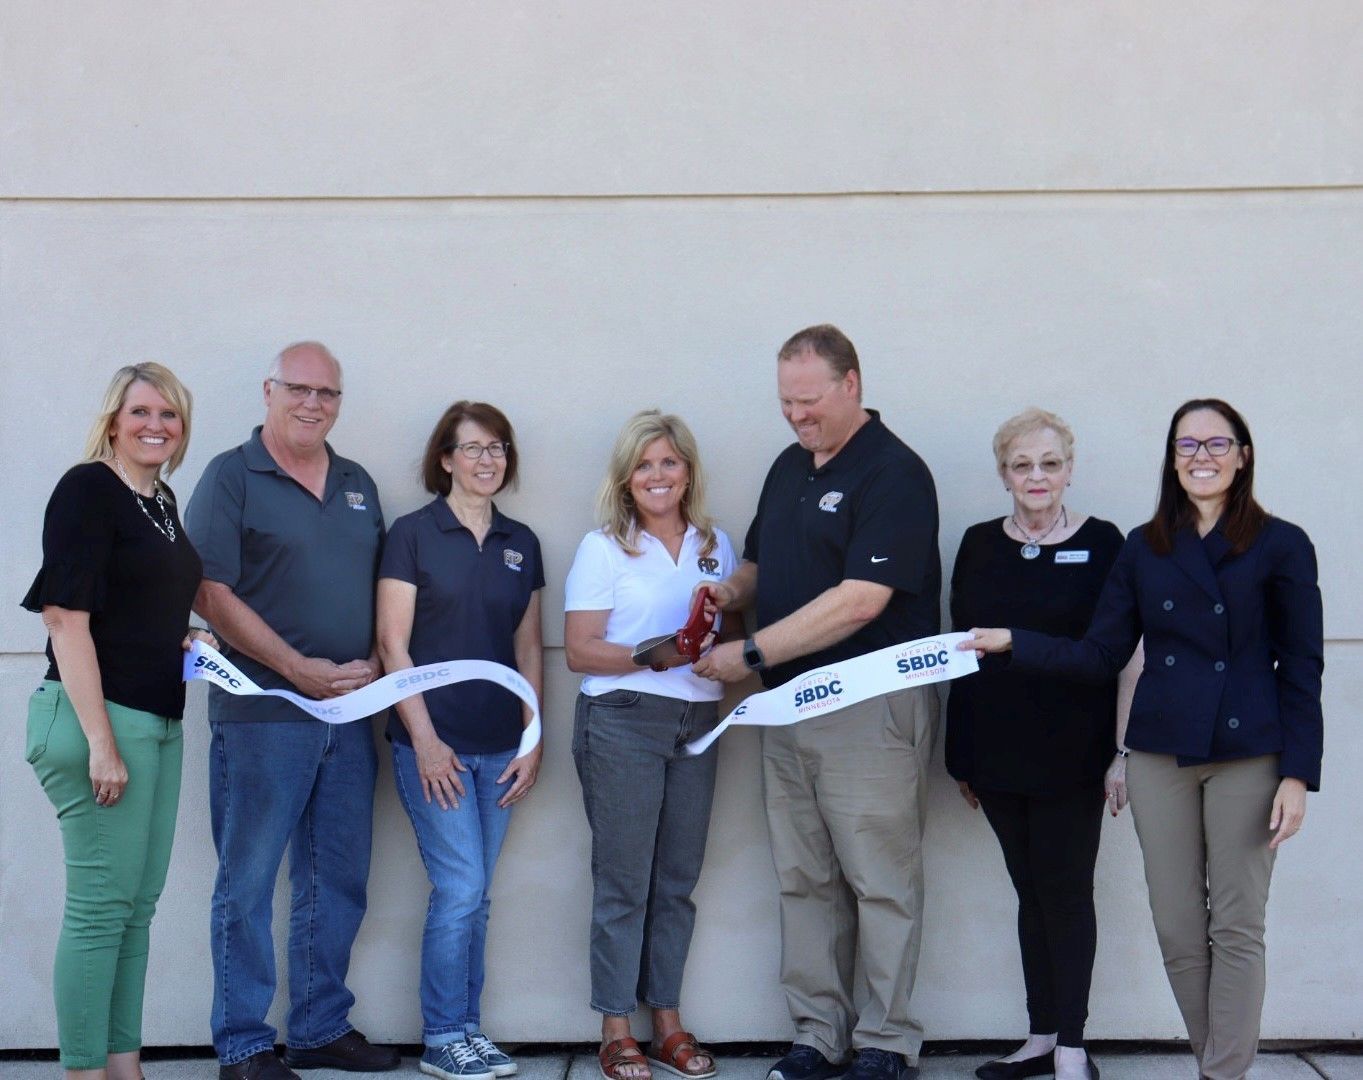 AP Design ribbon cutting with Brian and Nancy Kor, Nick and Jill Schwarz, and representatives of the SBDC.